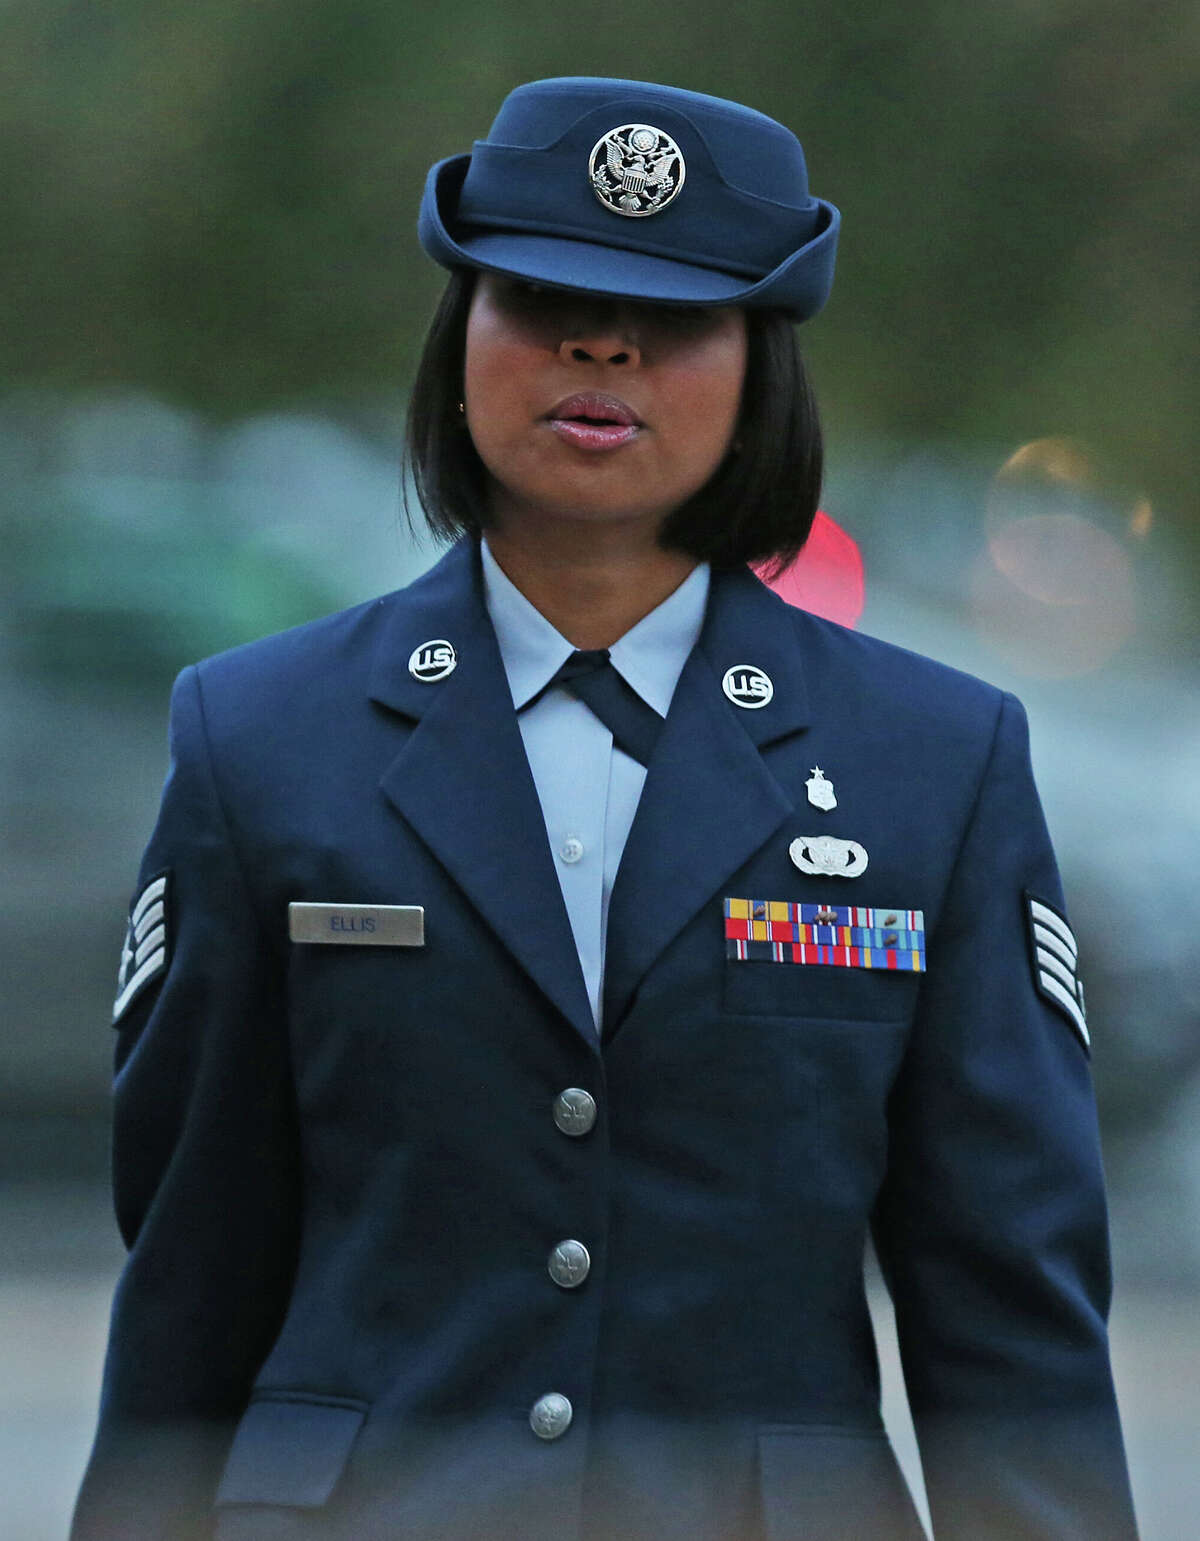 U.S. Air Force Staff Sgt. Annamarie Ellis arrives at Lackland Air Force Base for her trial on malt raining and maltreating basic trainees charges, Monday, March 24, 2014.